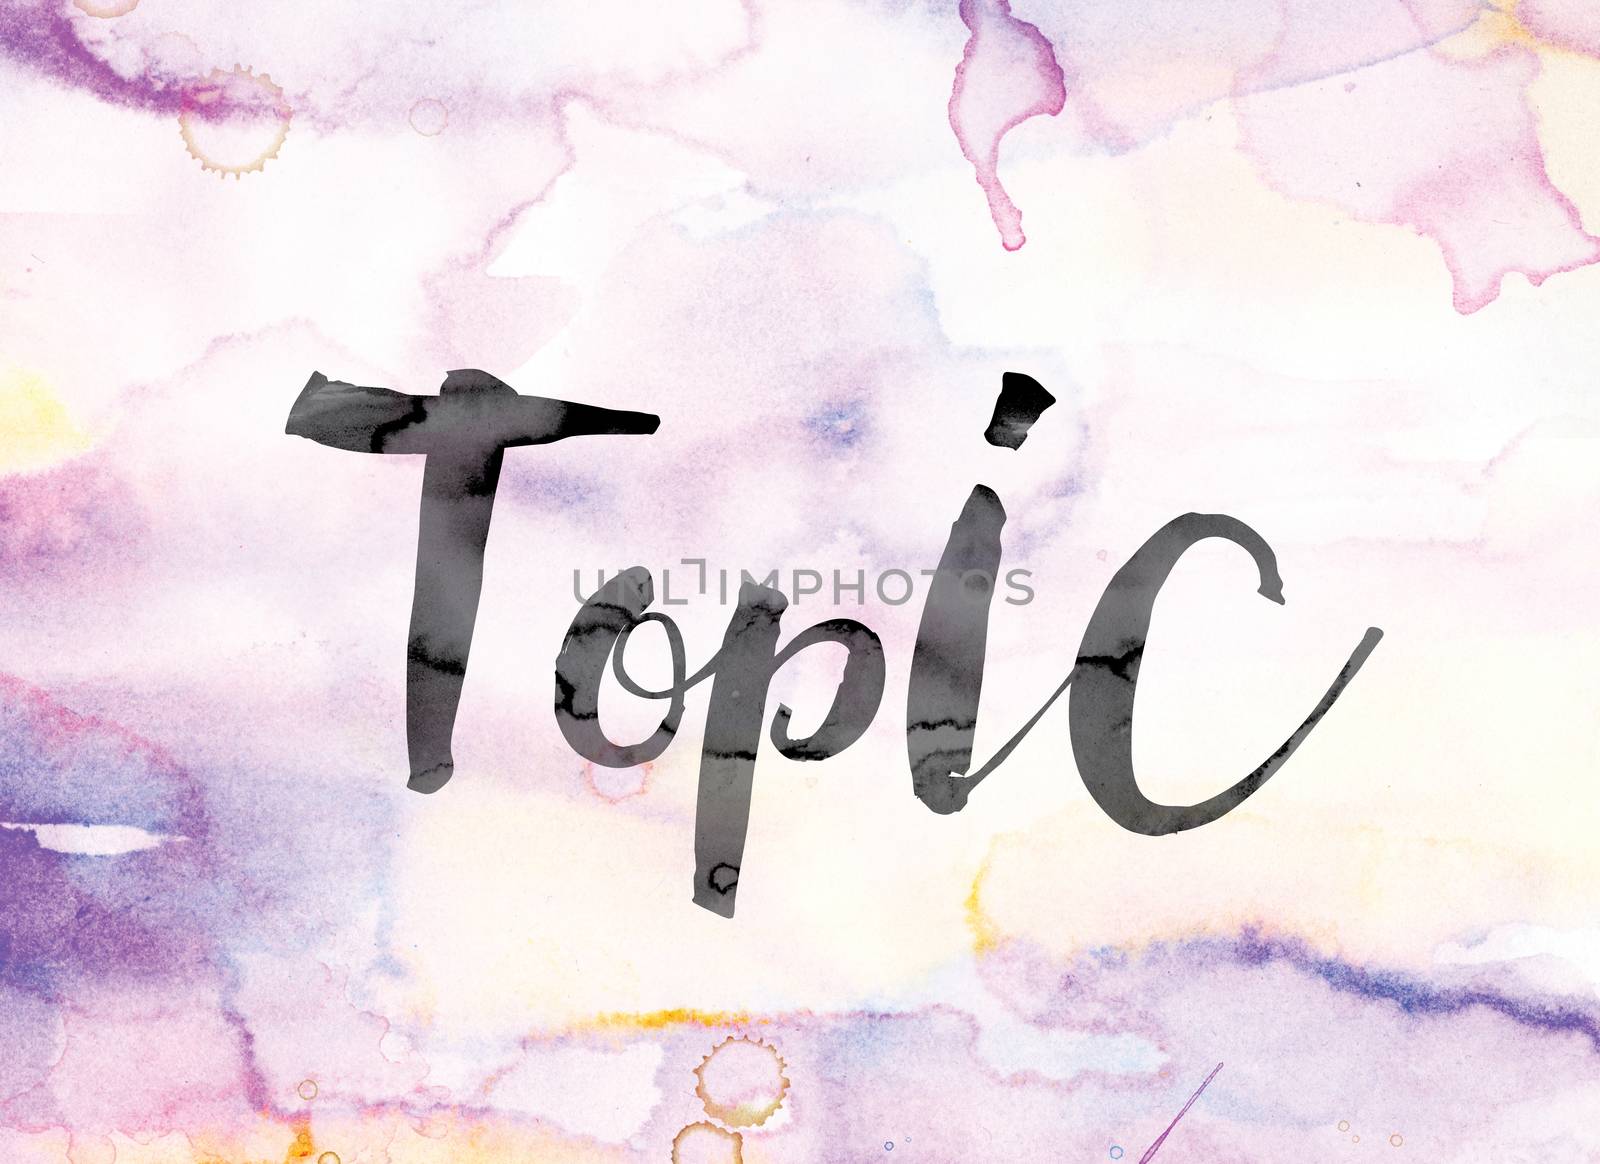 The word "Topic" painted in black ink over a colorful watercolor washed background concept and theme.